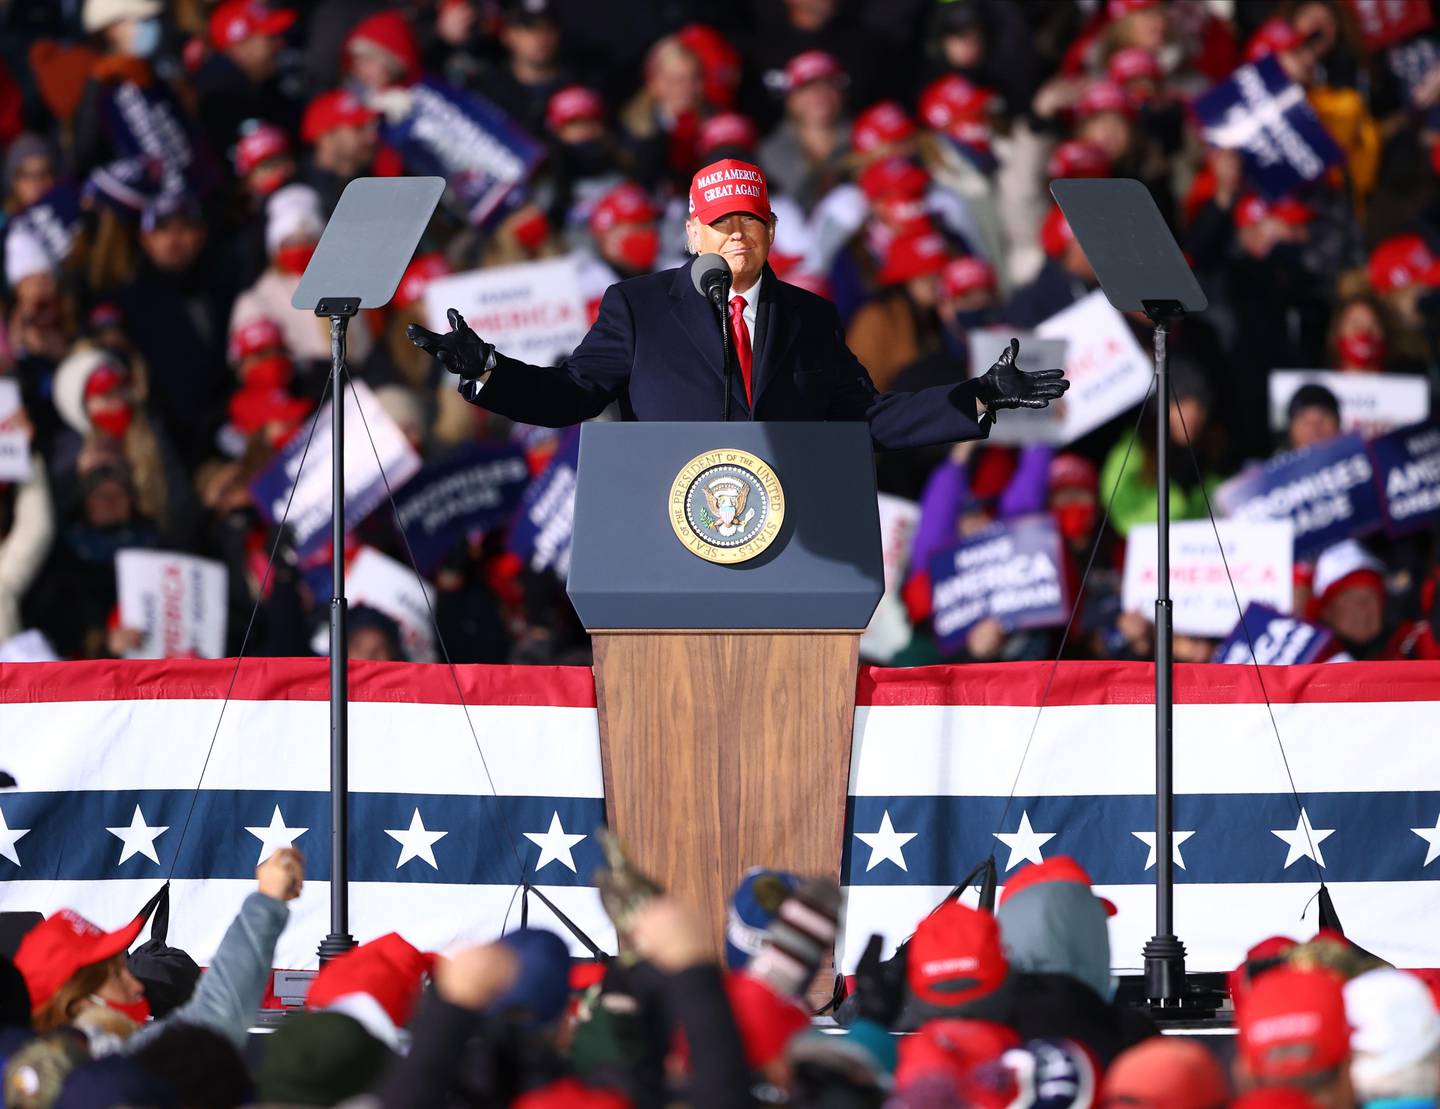 TRAVERSE CITY, MI - NOVEMBER 02: U.S. President Donald Trump Donald speaks during a campaign rally on November 2, 2020 in Traverse City, Michigan. President Trump and former Vice President Democratic presidential nominee Joe Biden are making multiple stops in swing states ahead of the general election on November 3rd.   Rey Del Rio/Getty Images/AFP
== FOR NEWSPAPERS, INTERNET, TELCOS & TELEVISION USE ONLY ==